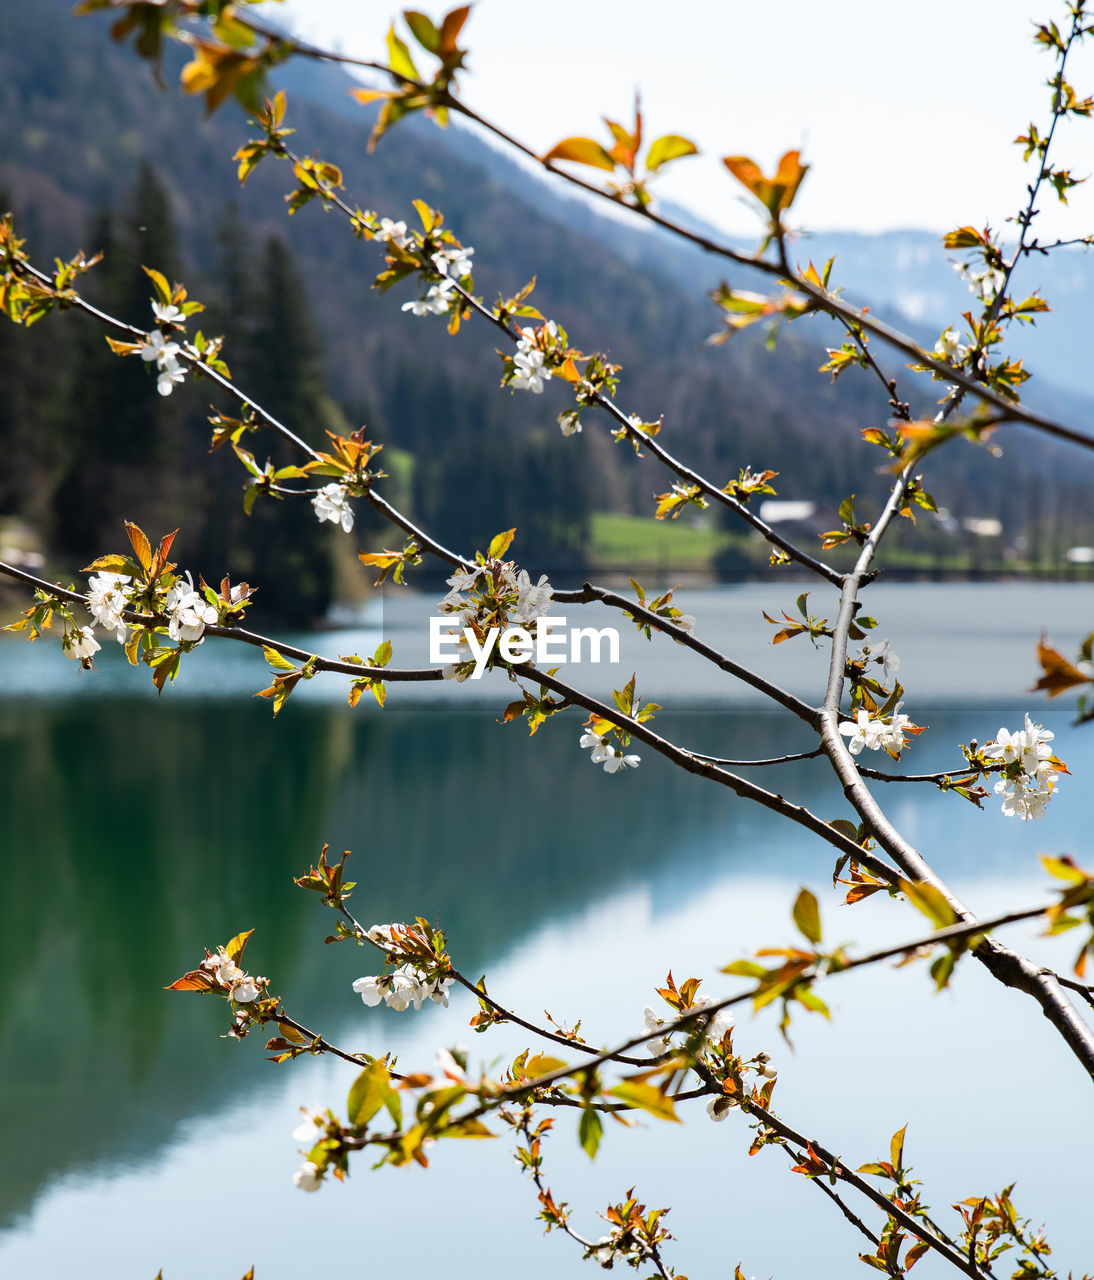 Close-up of blooming cherry tree against lake